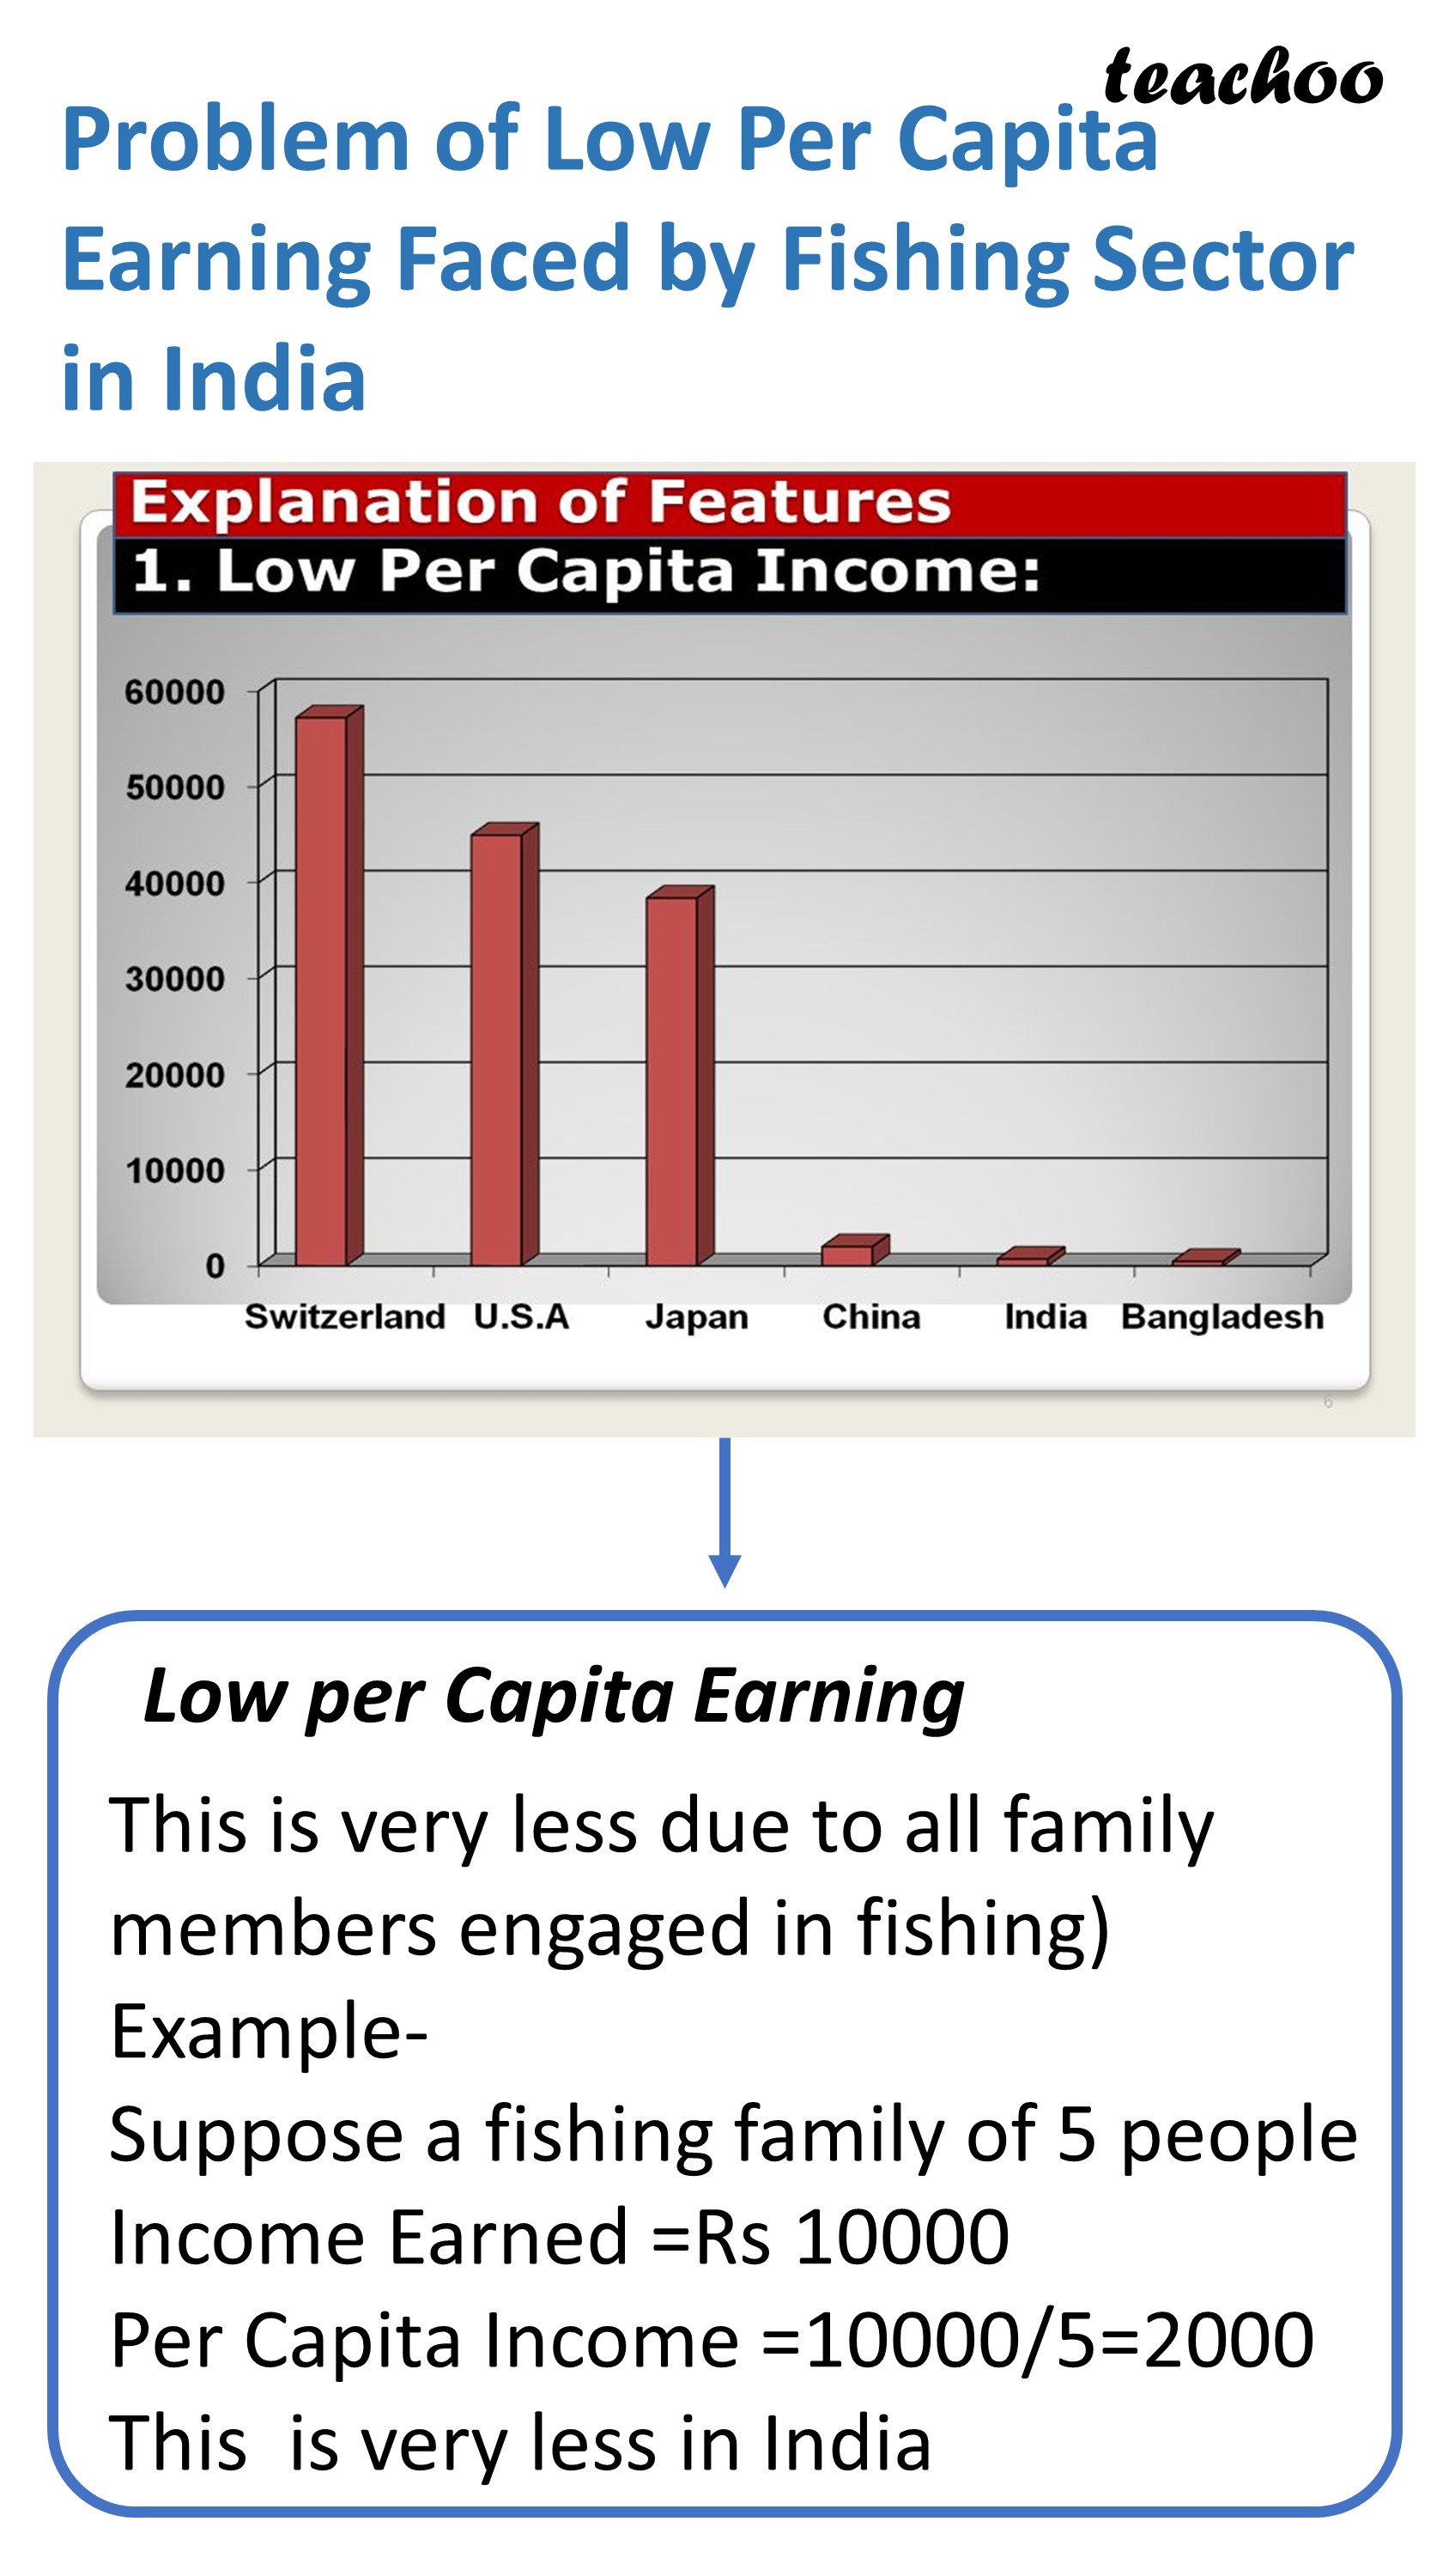 Problem of Low Per Capita Earning Faced by Fishing Sector in India - Teachoo.JPG